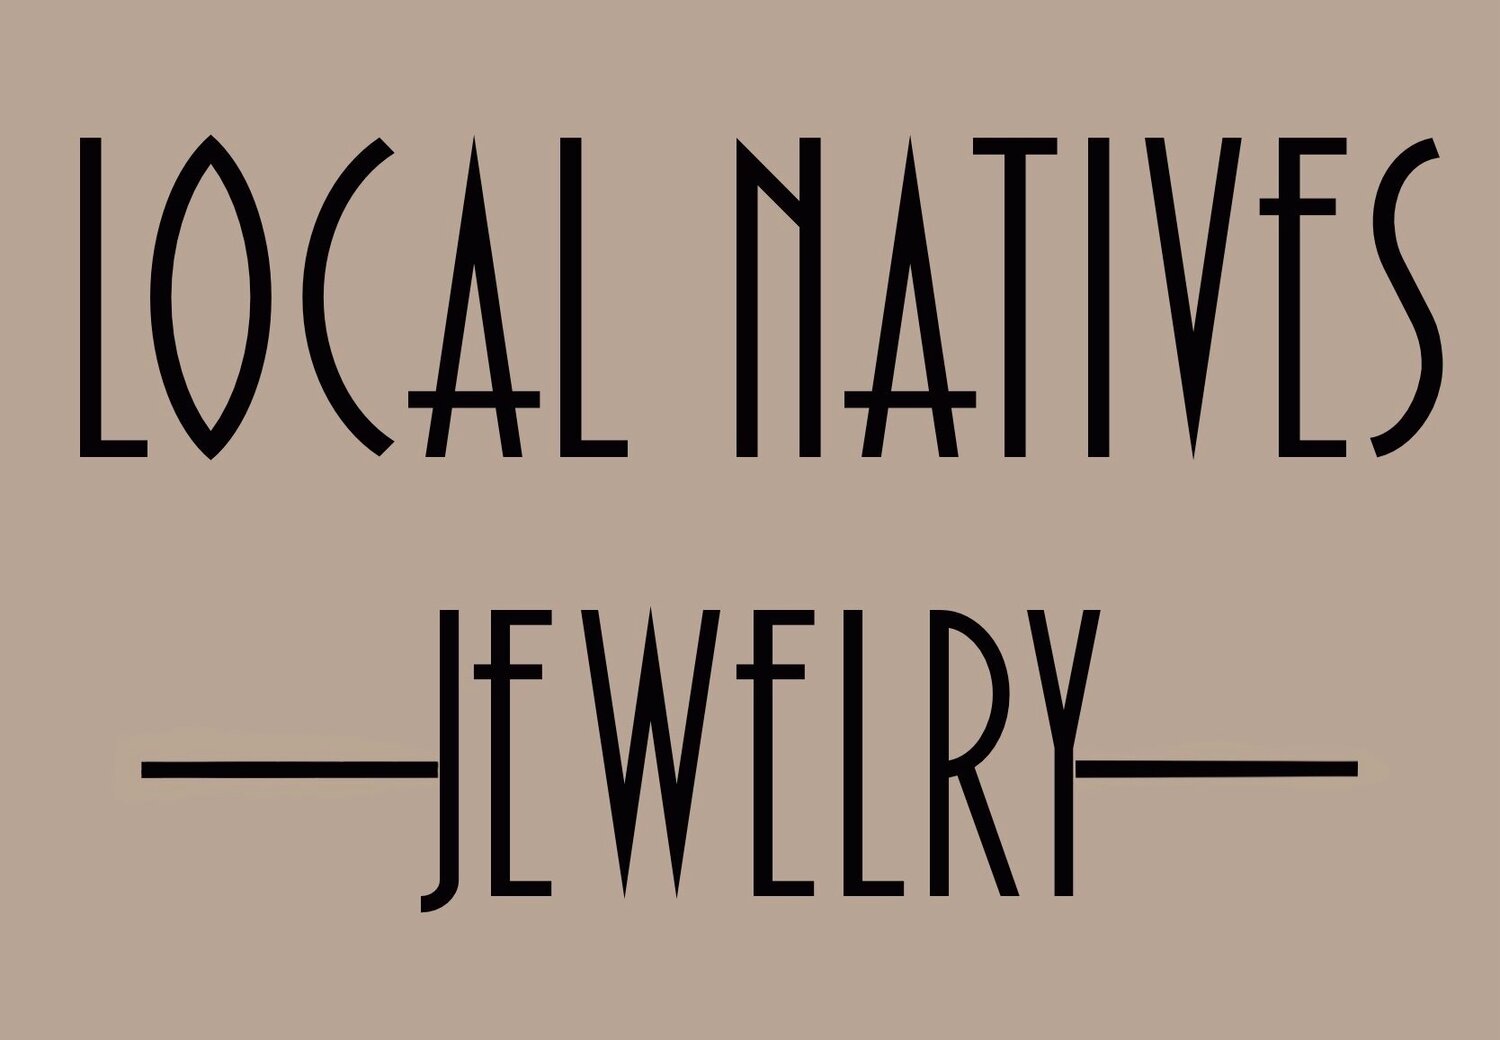 Local Natives Jewelry